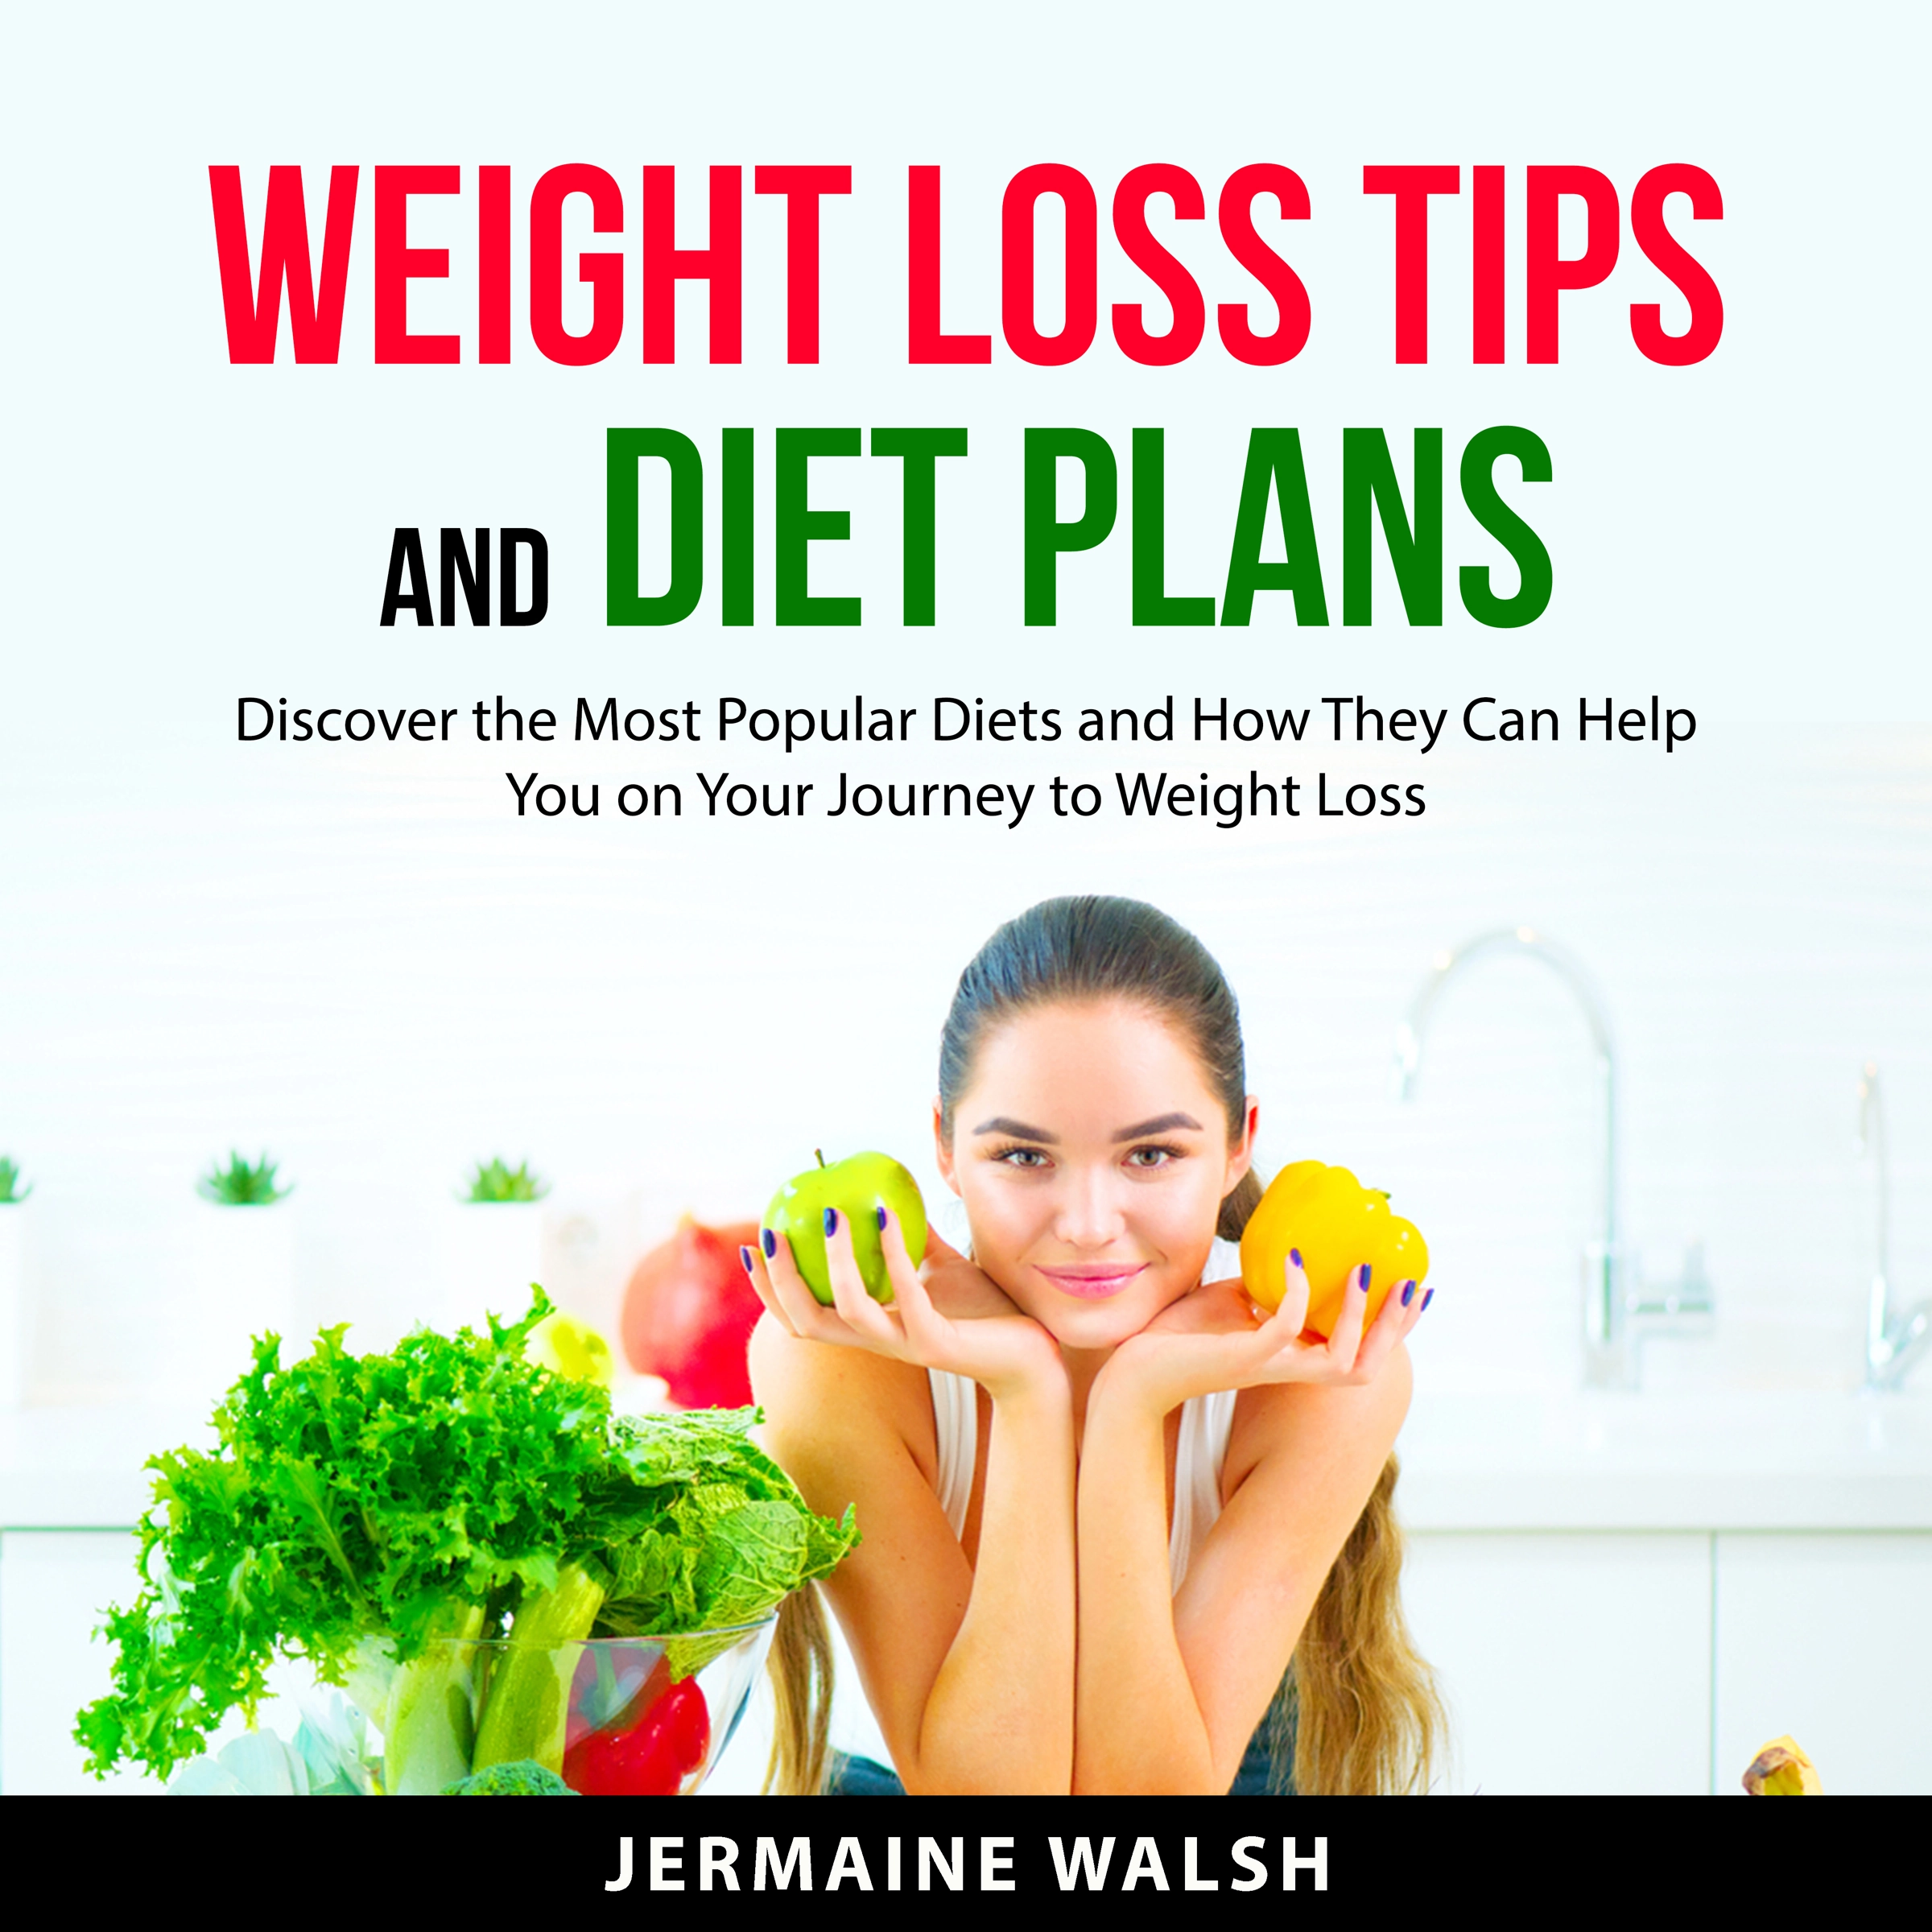 Weight Loss Tips and Diet Plans Audiobook by Jermaine Walsh